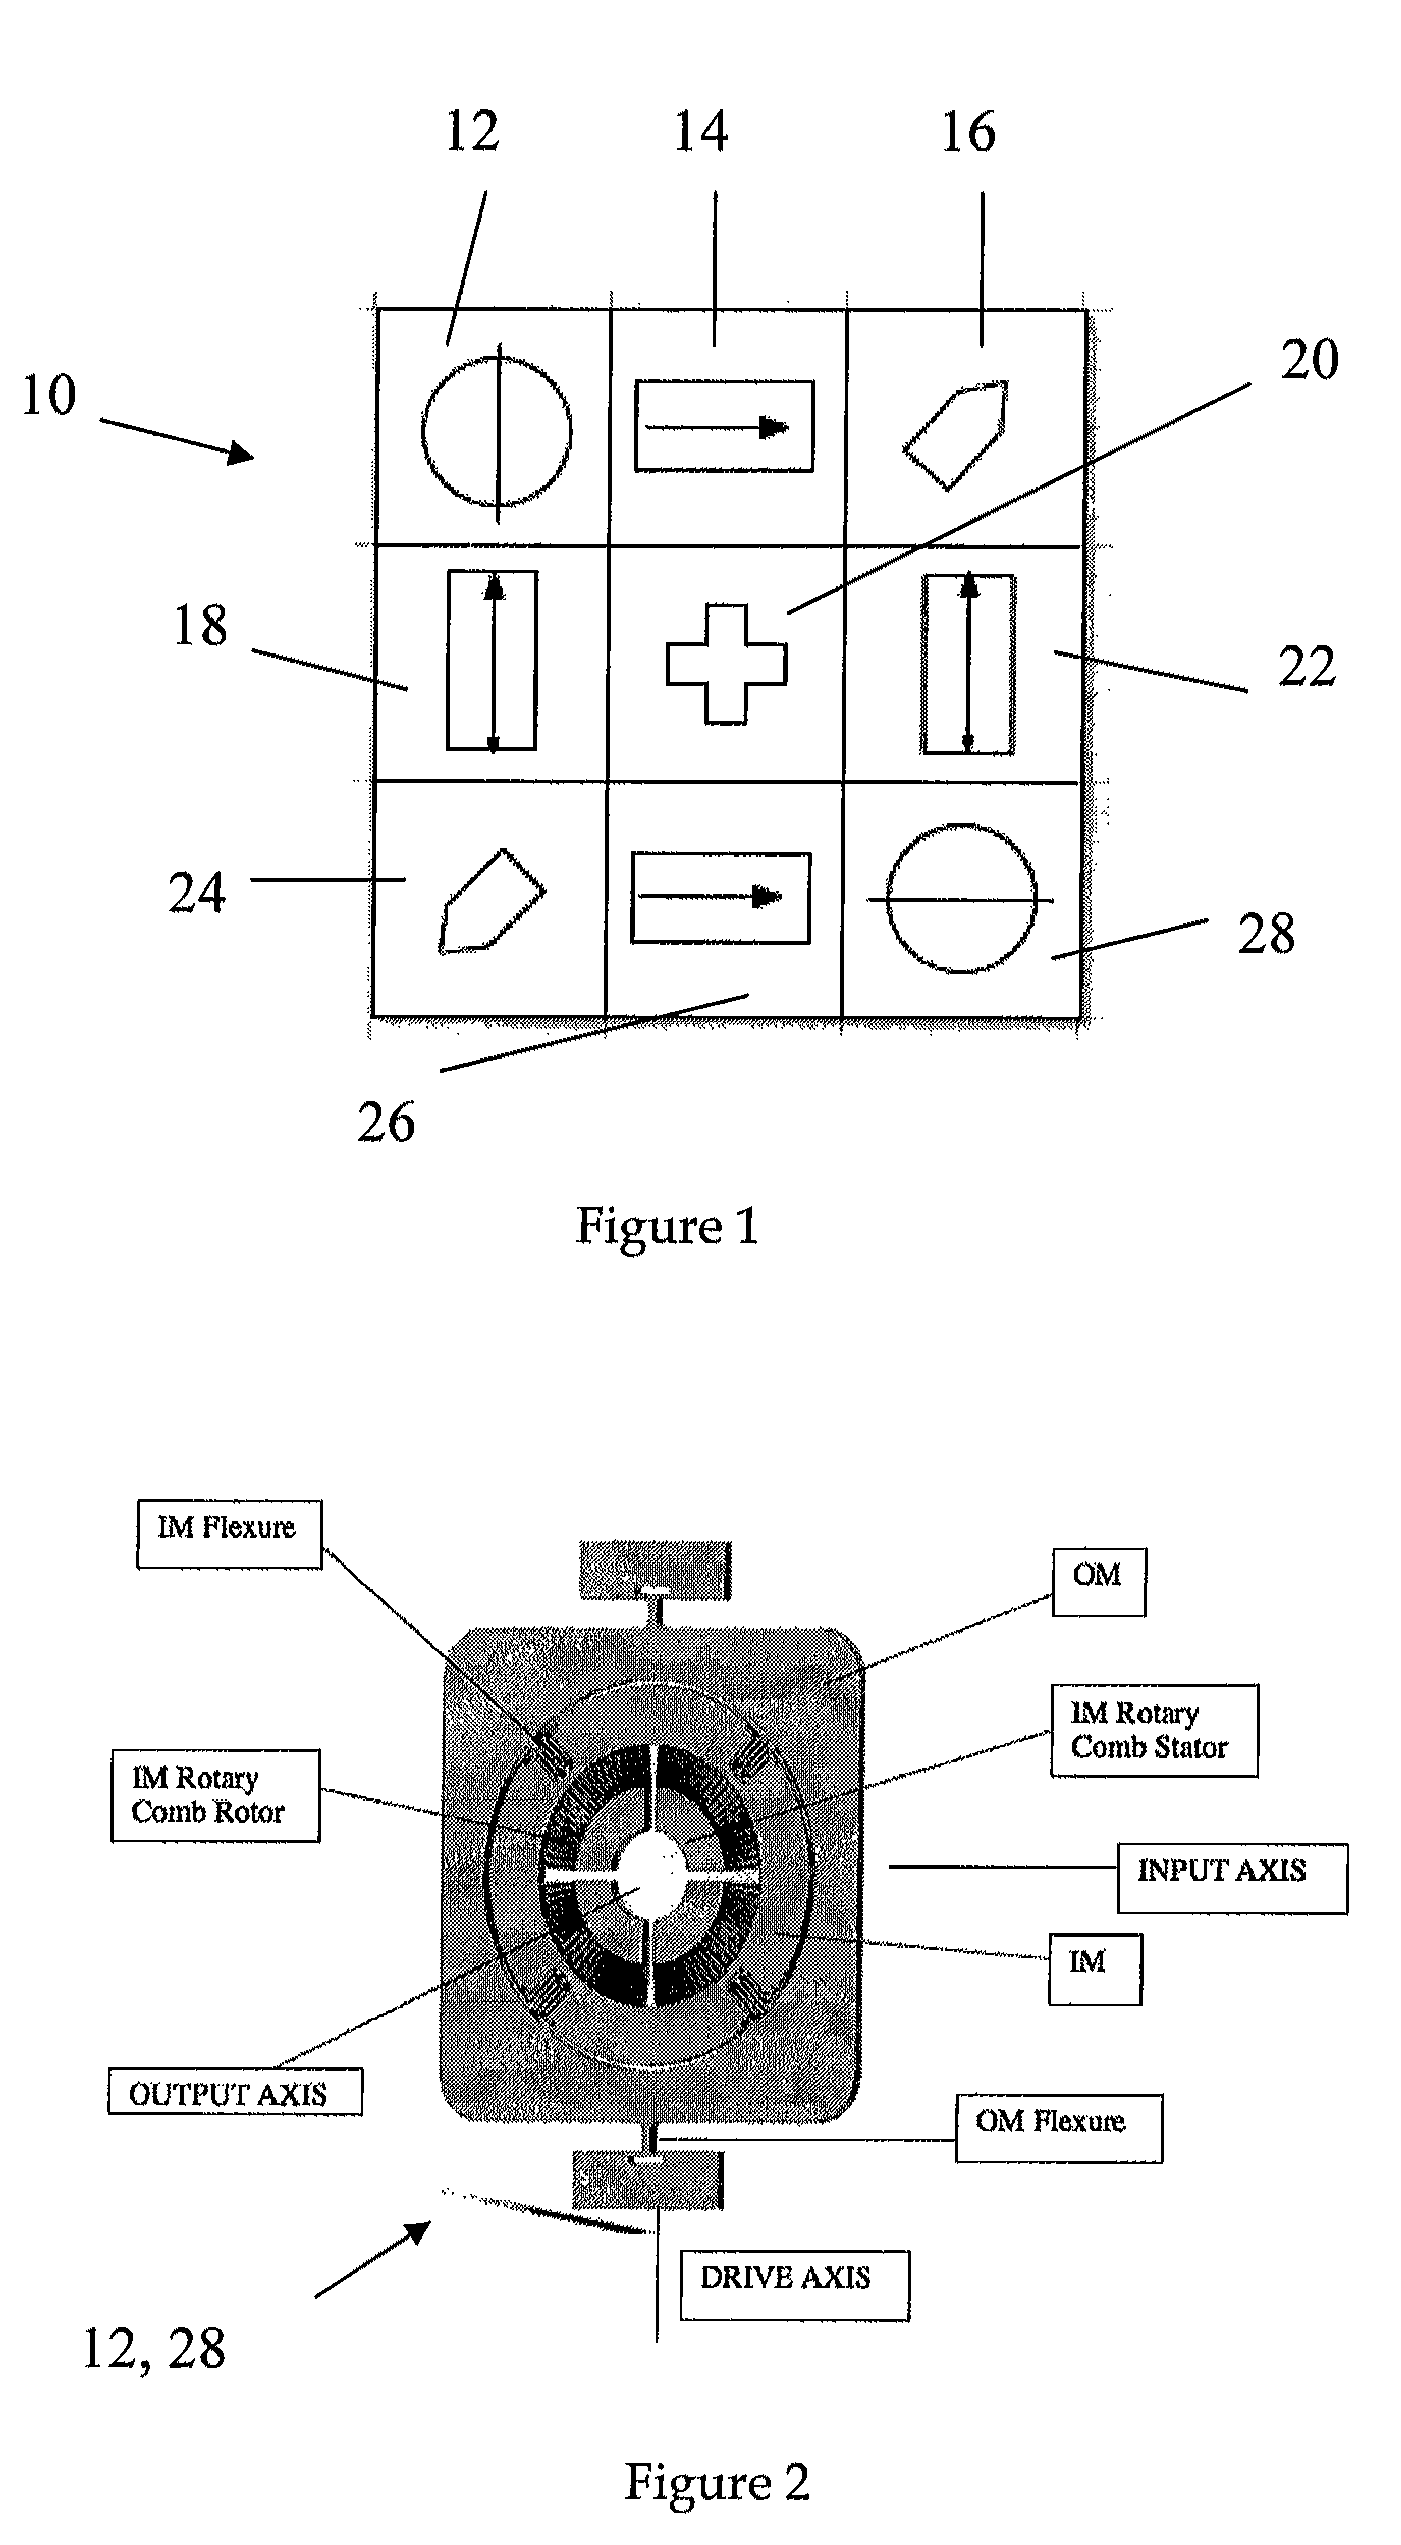 Inertial measurement unit for spin-stabilized aerial vehicles, and method of providing guidance information using same